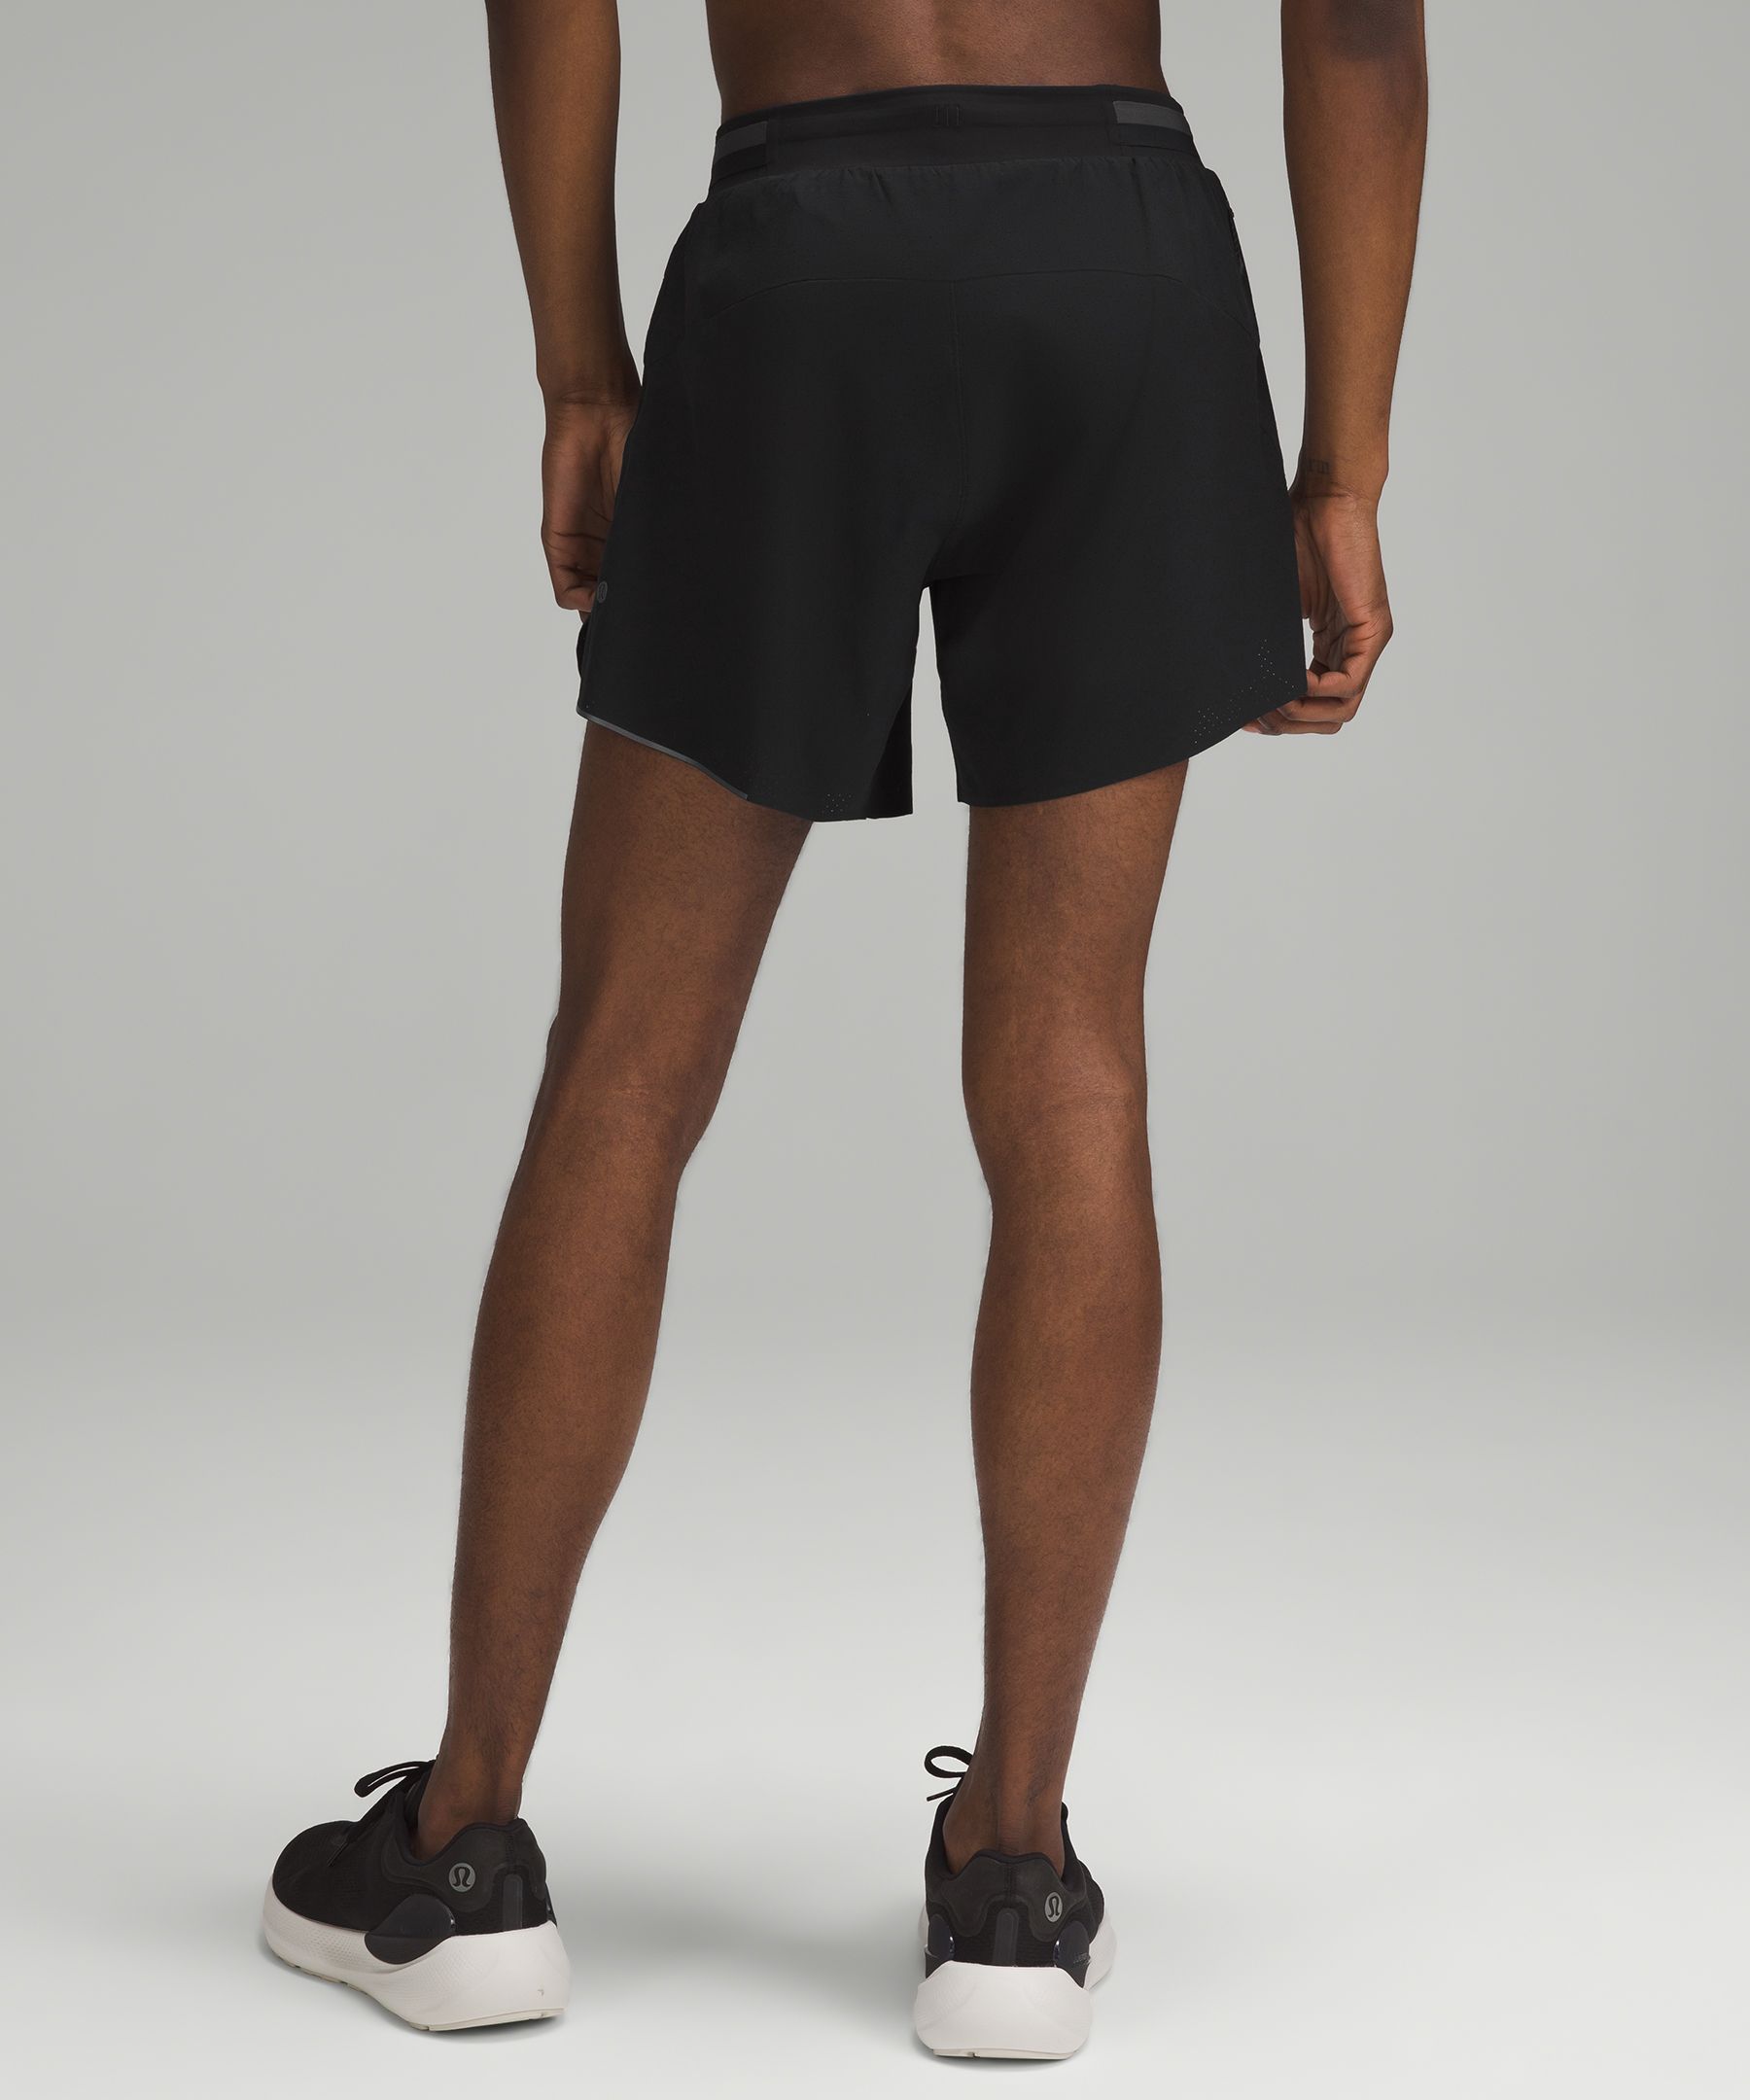 Lululemon Fast and Free 6″ Shorts Review – Swags Fit Style